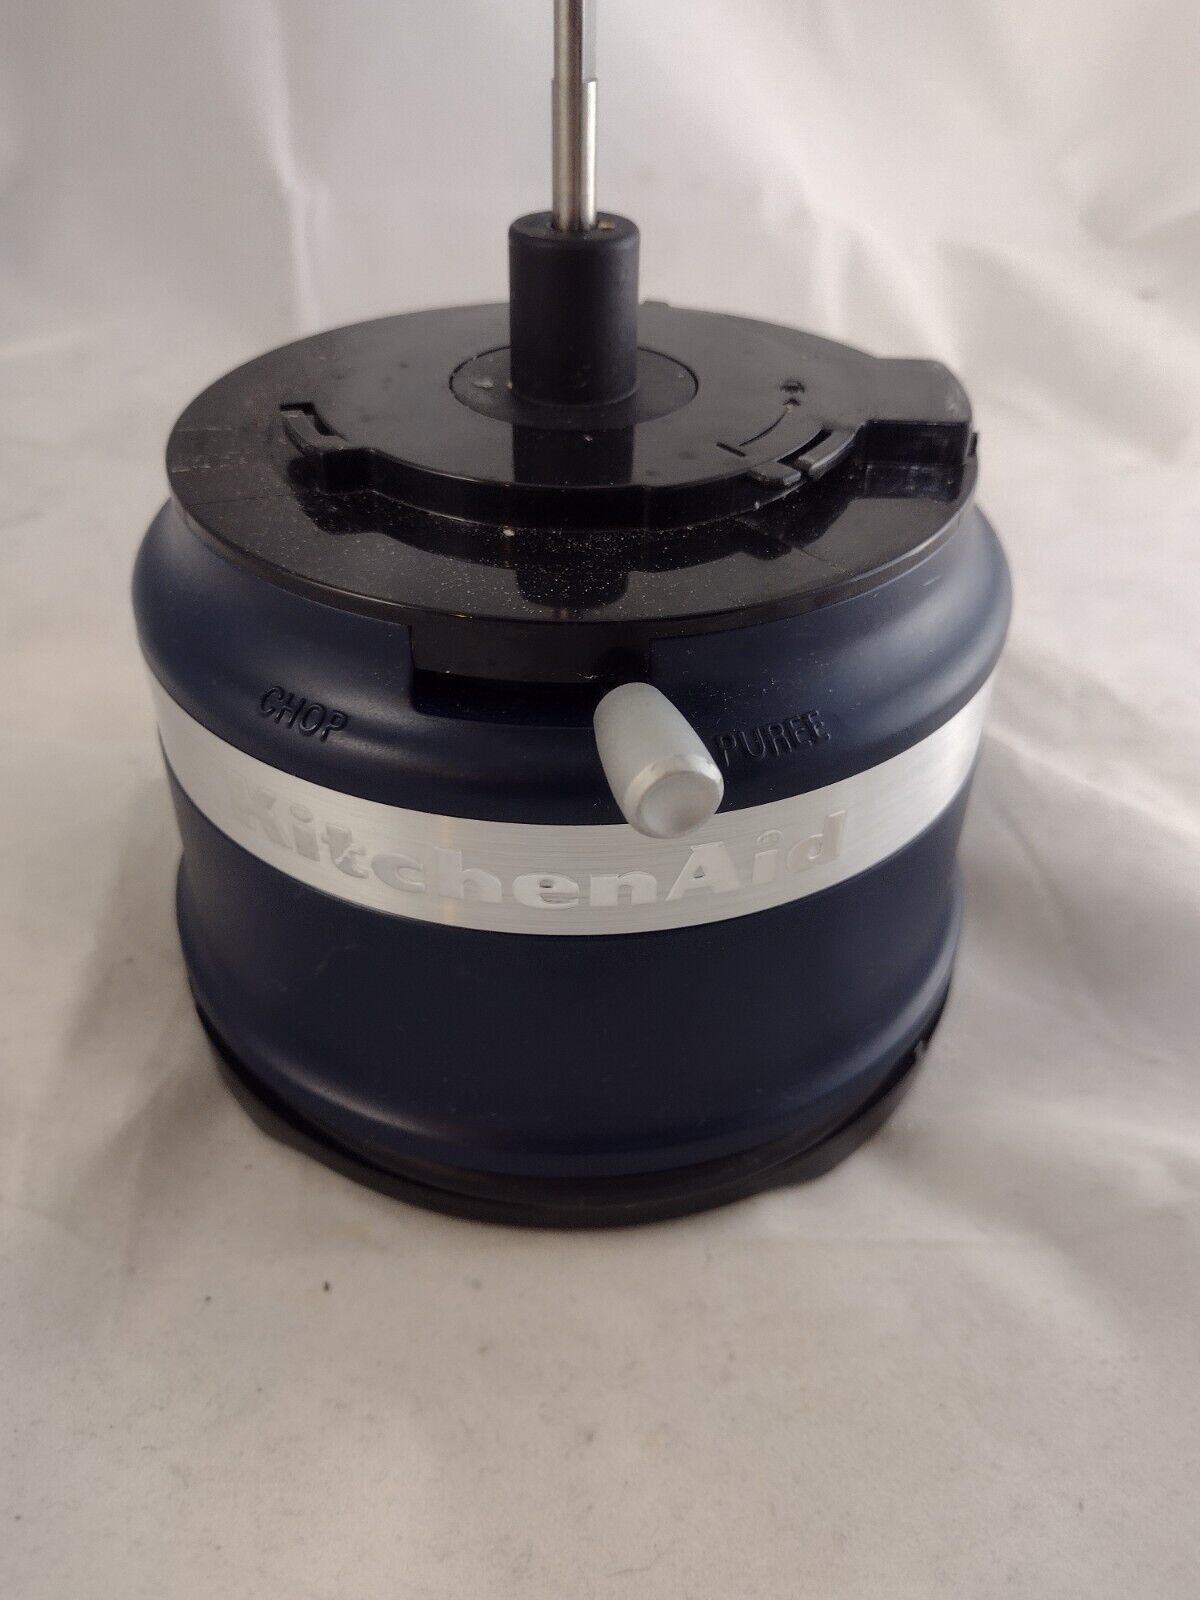 Primary image for KitchenAid KFC3516IB 3.5 Cups Food Chopper Blue Replacement Base 2 Speed Motor